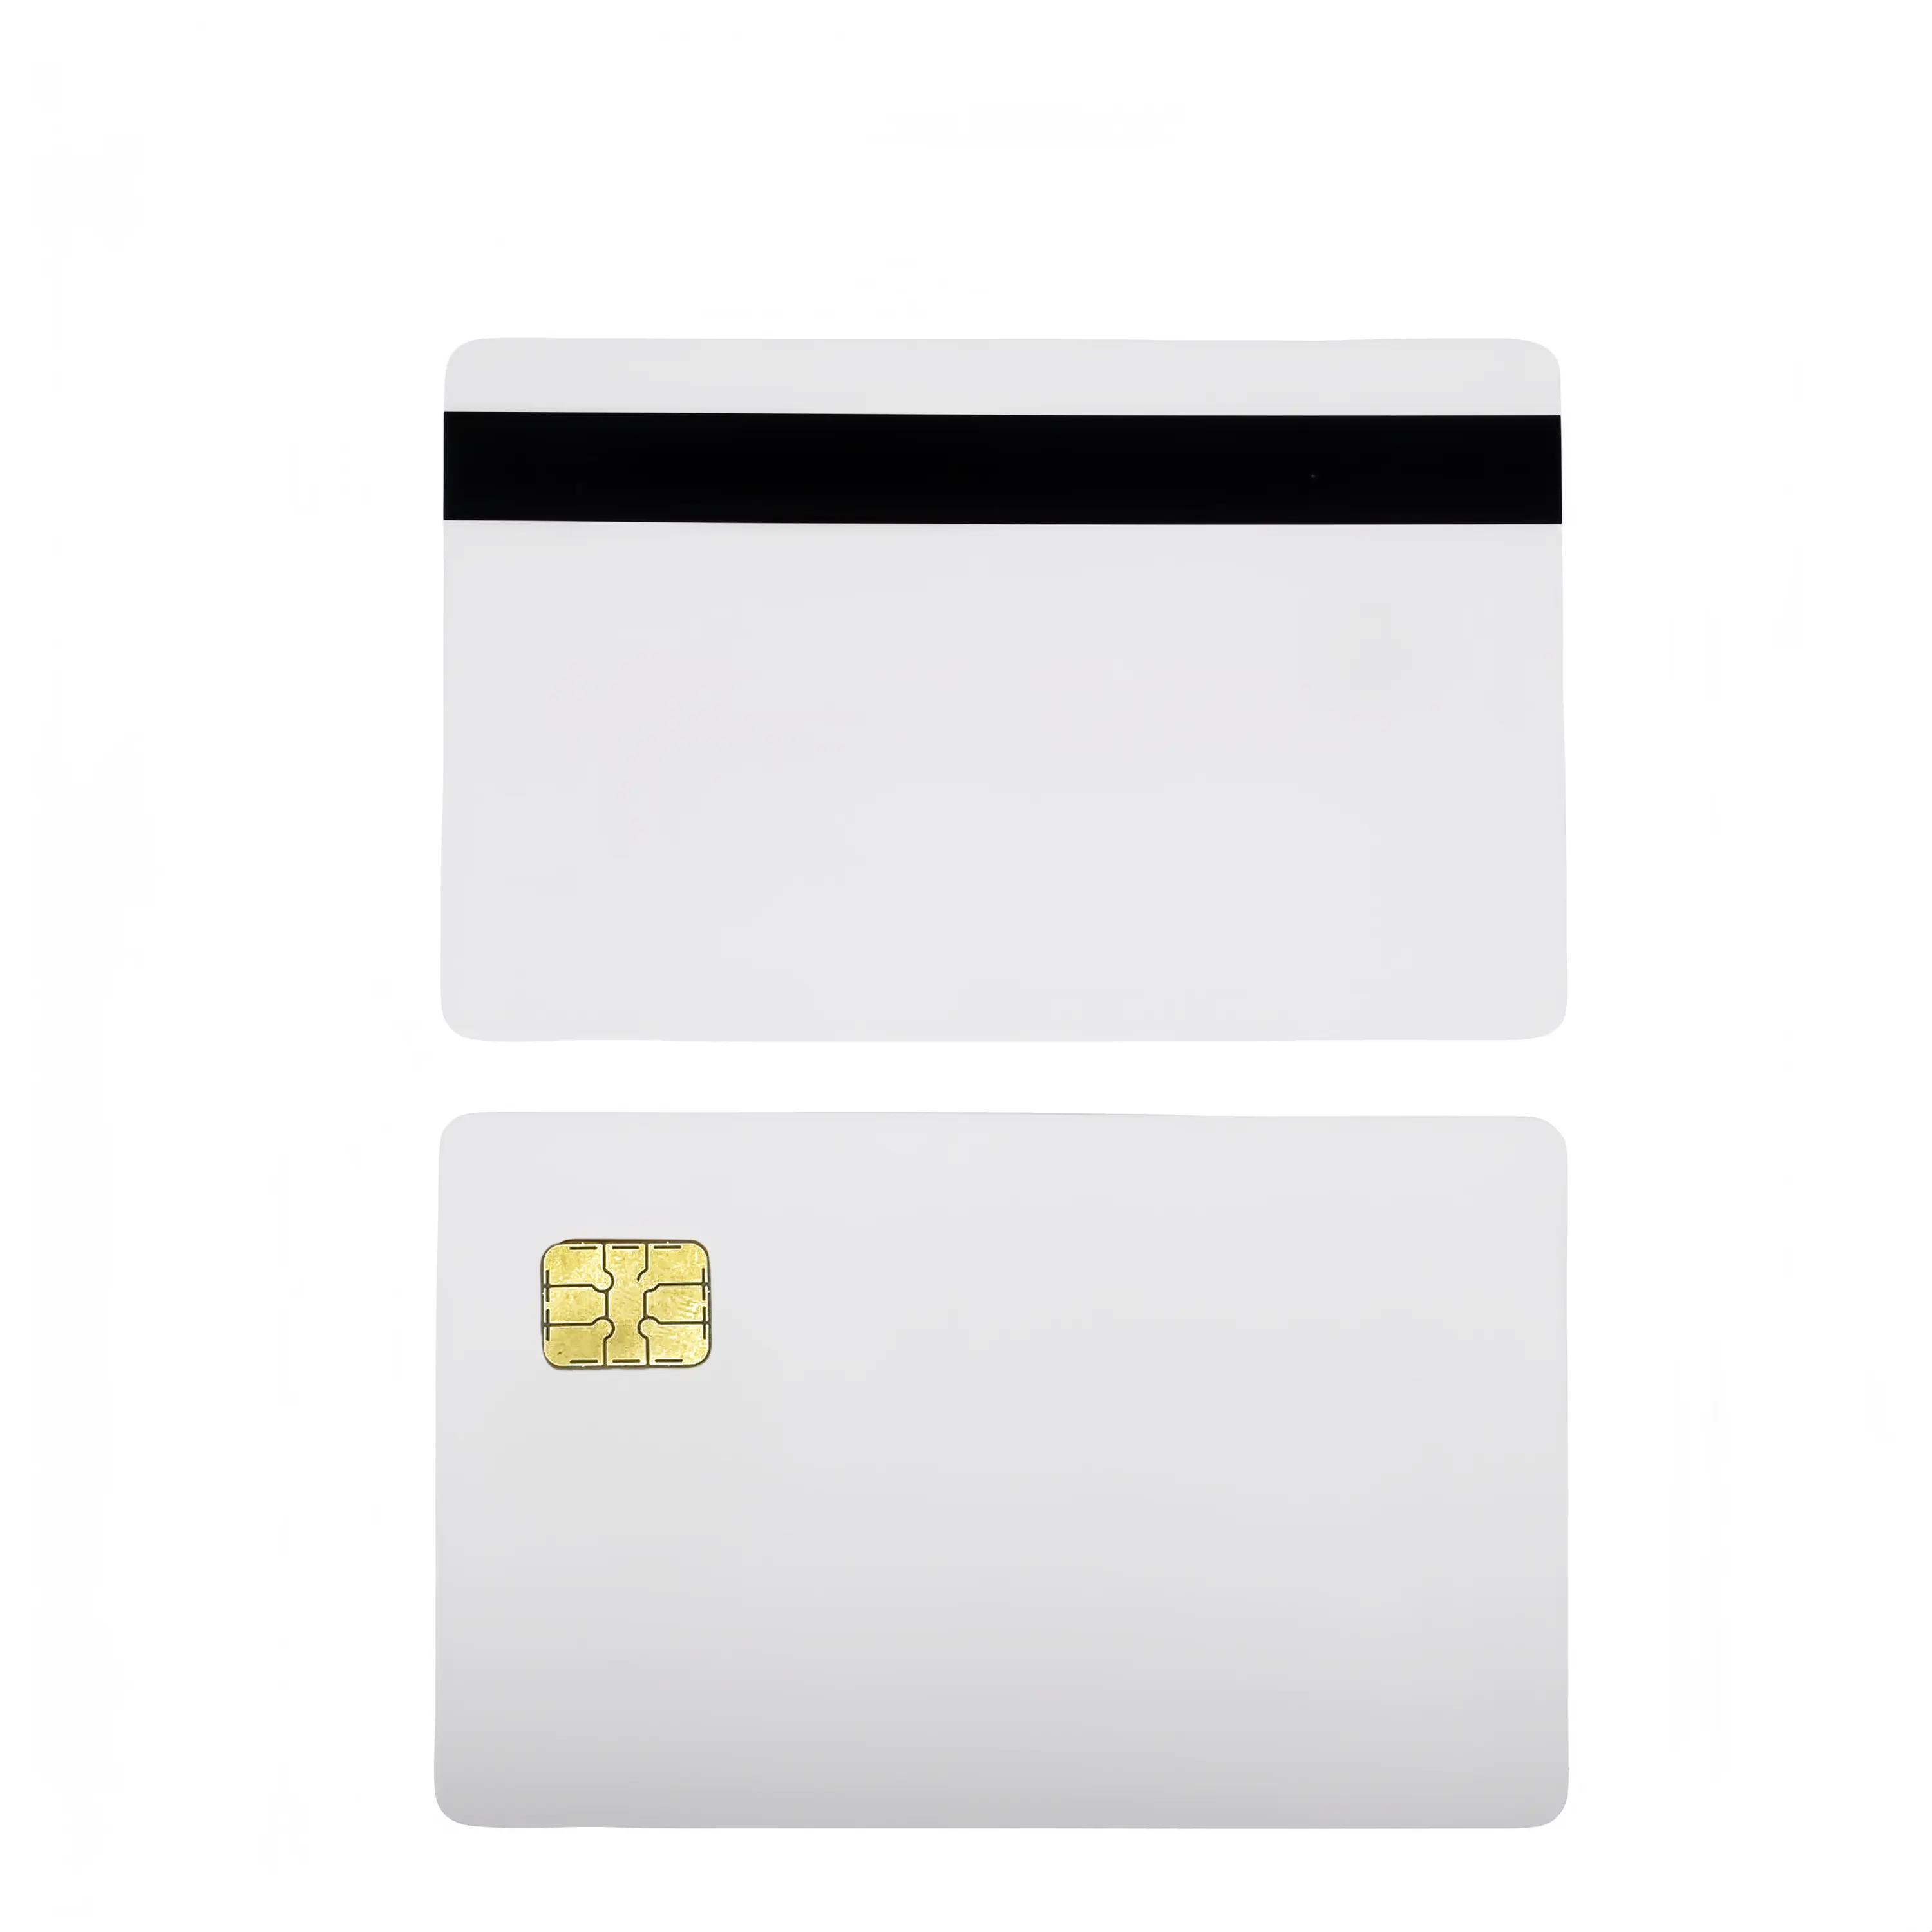 Hot Selling Holographic Mark Contact IC Hot Stamping Bank JAVA Proximity Card THD89 Chips